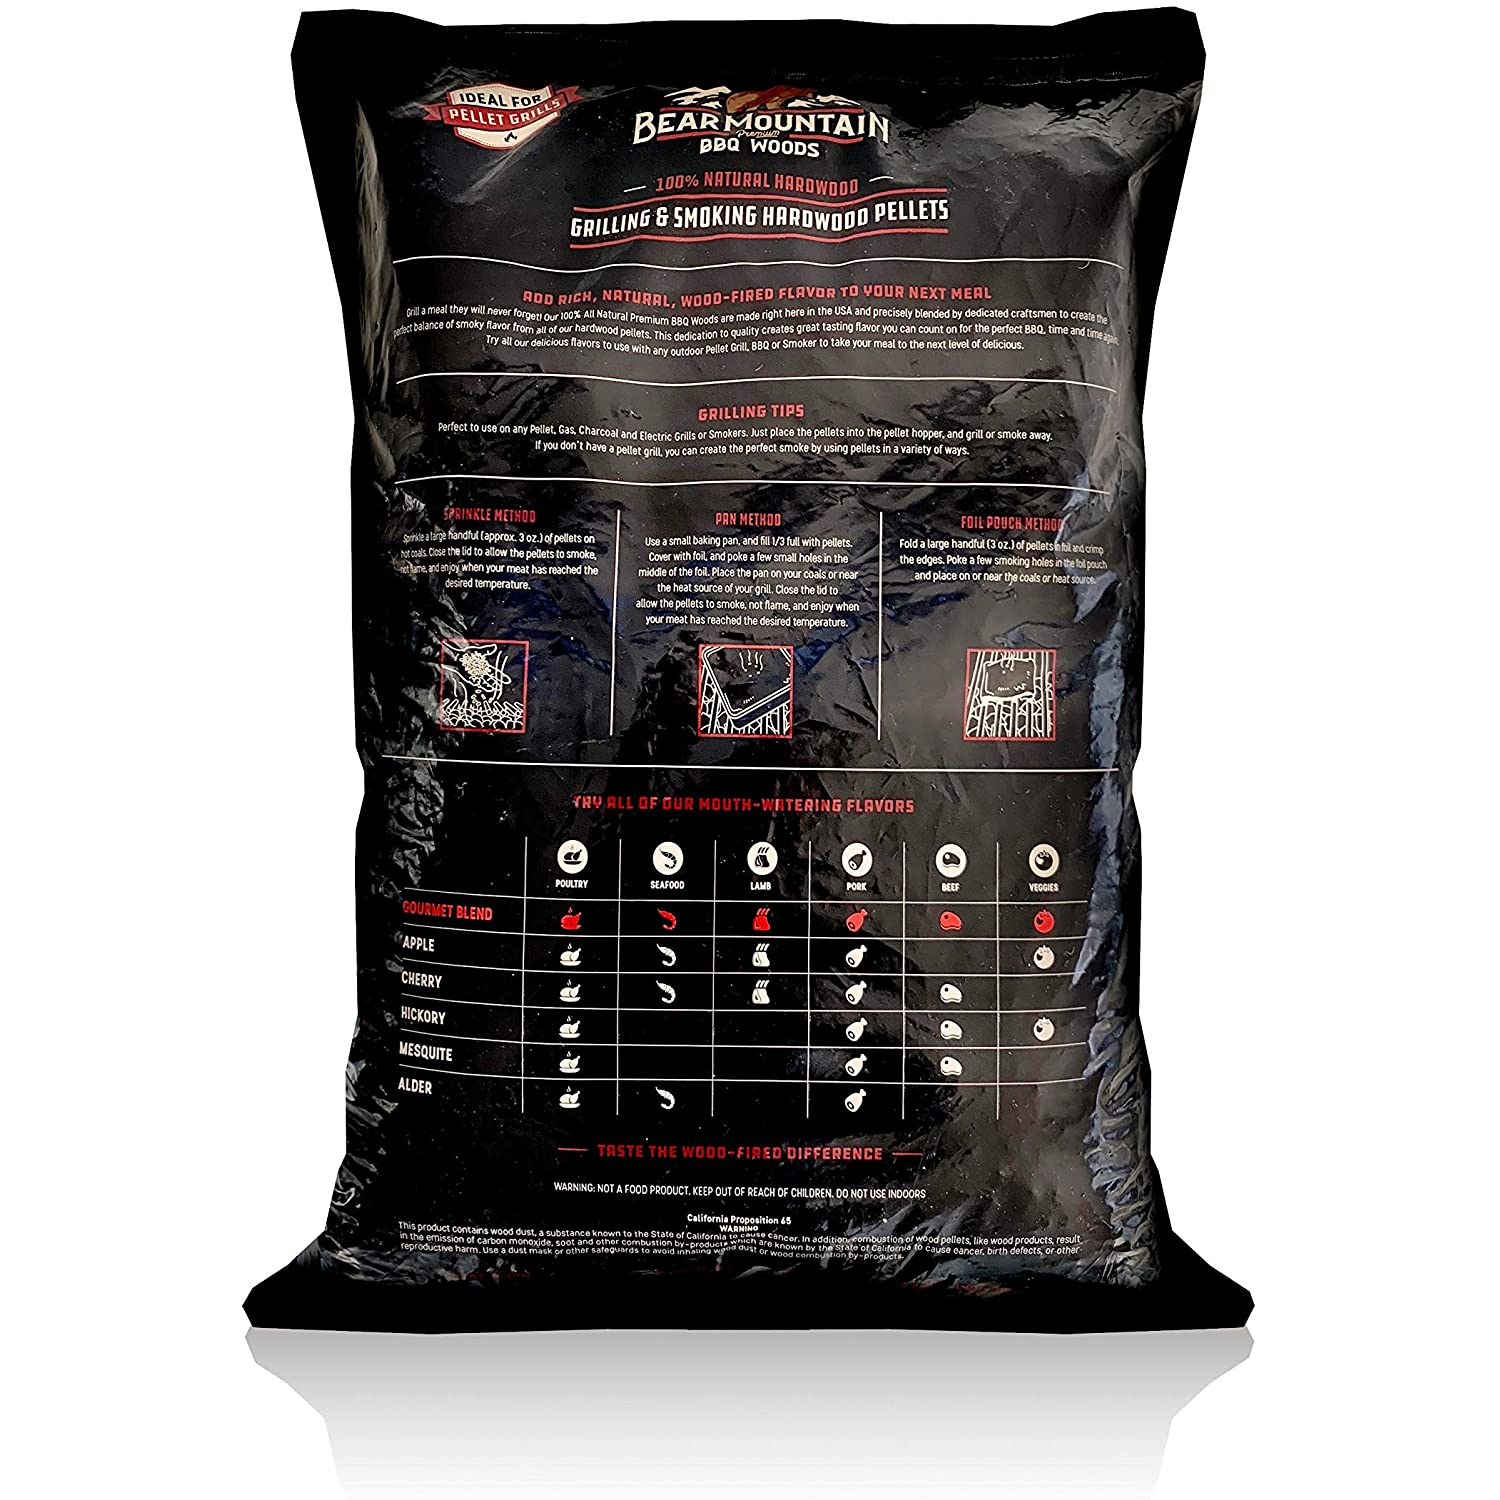 Bear Mountain BBQ 100% Natural Hardwood Maple Flavor Pellets, 20 Pounds - image 2 of 6